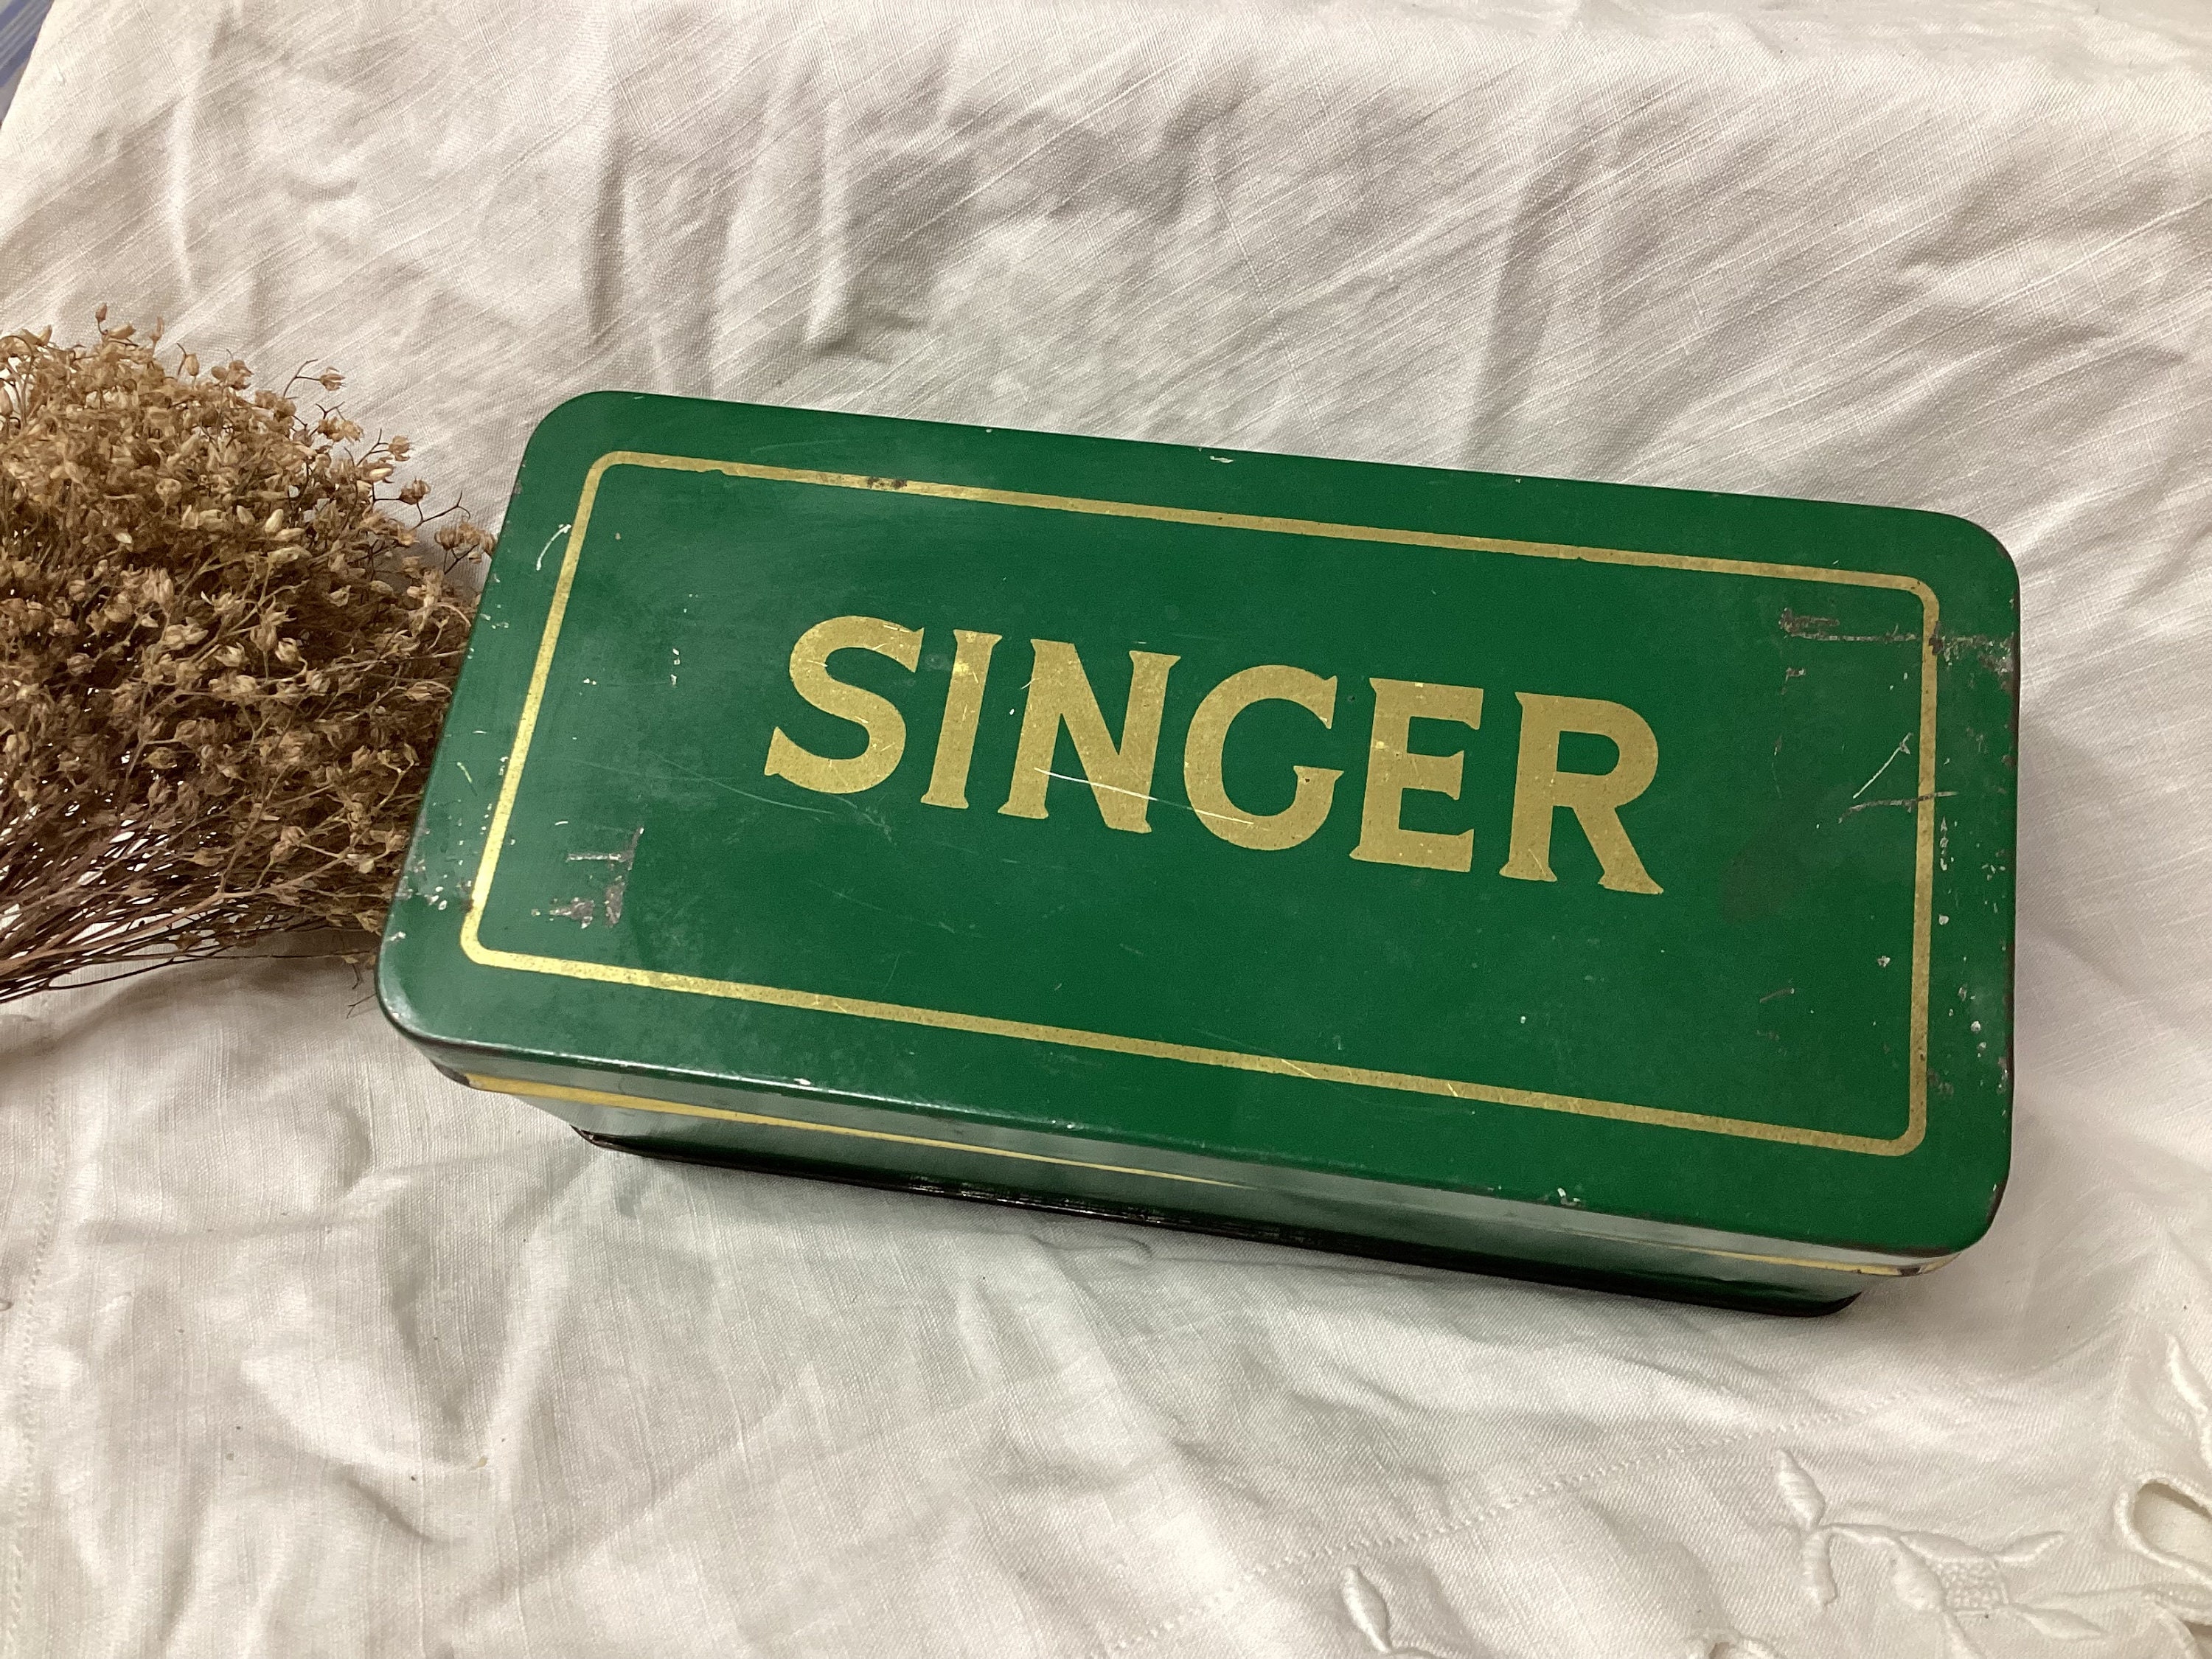 Singer Sewing Machine Lot of Attachments in Green Metal Tin Box 